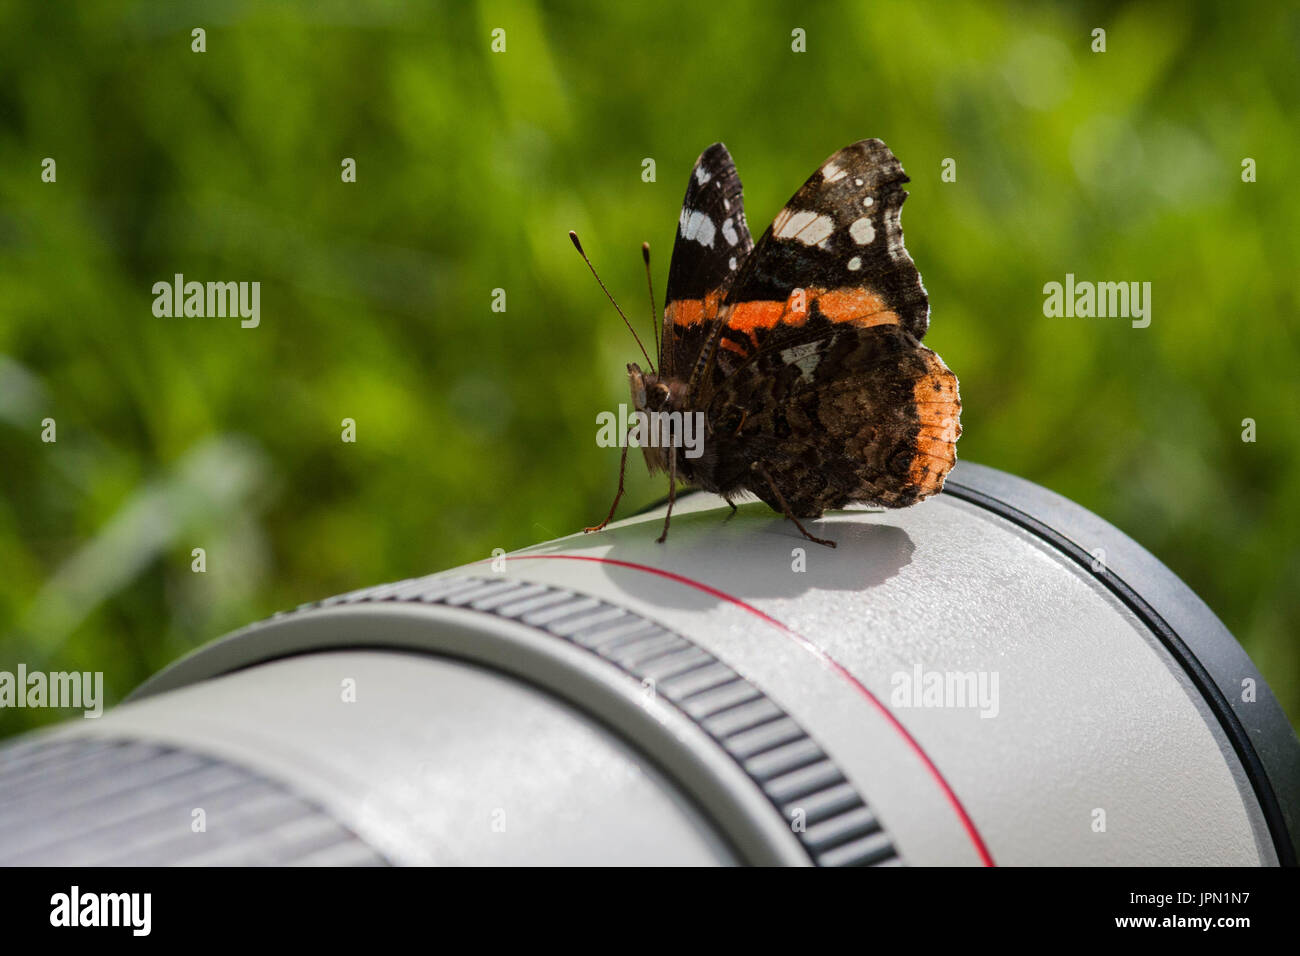 Red Admiral Butterfly on Lens Stock Photo